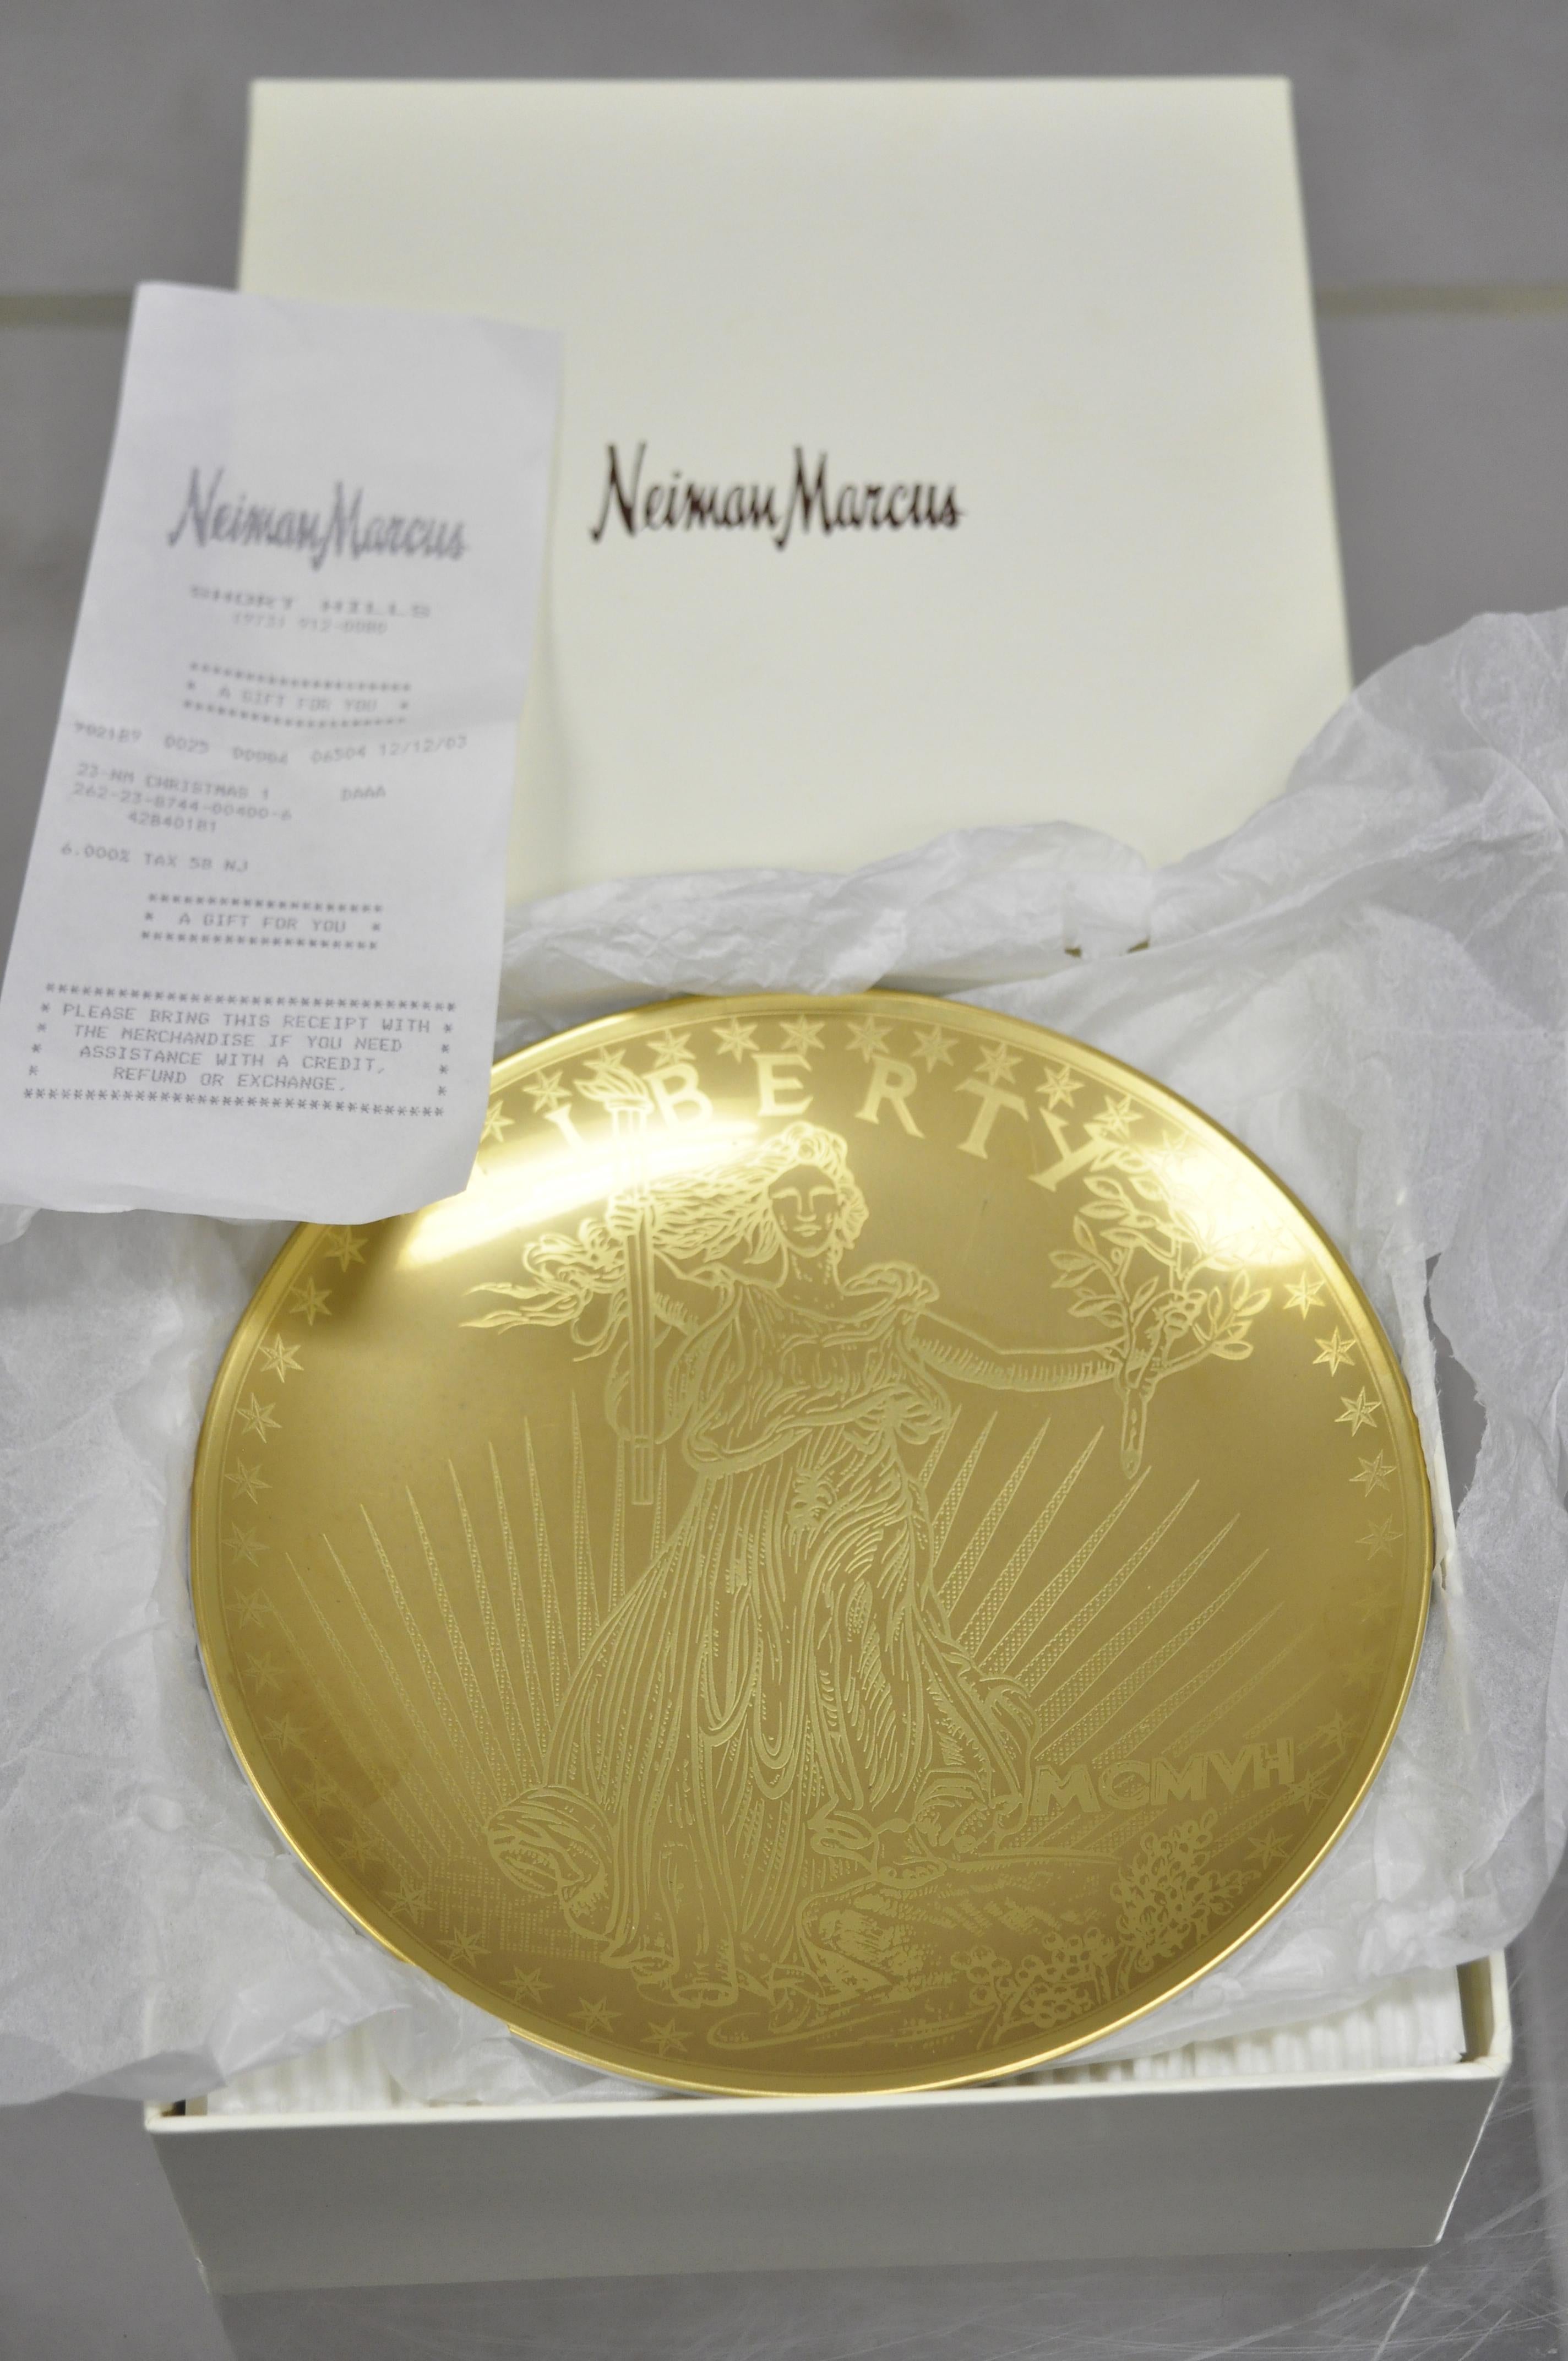 Set of 6 Neiman Marcus 95th Anniversary 1907 gold mintage dessert plates. Listing is new in box, a rare set, original receipt included, circa 2003. Measurements: .75